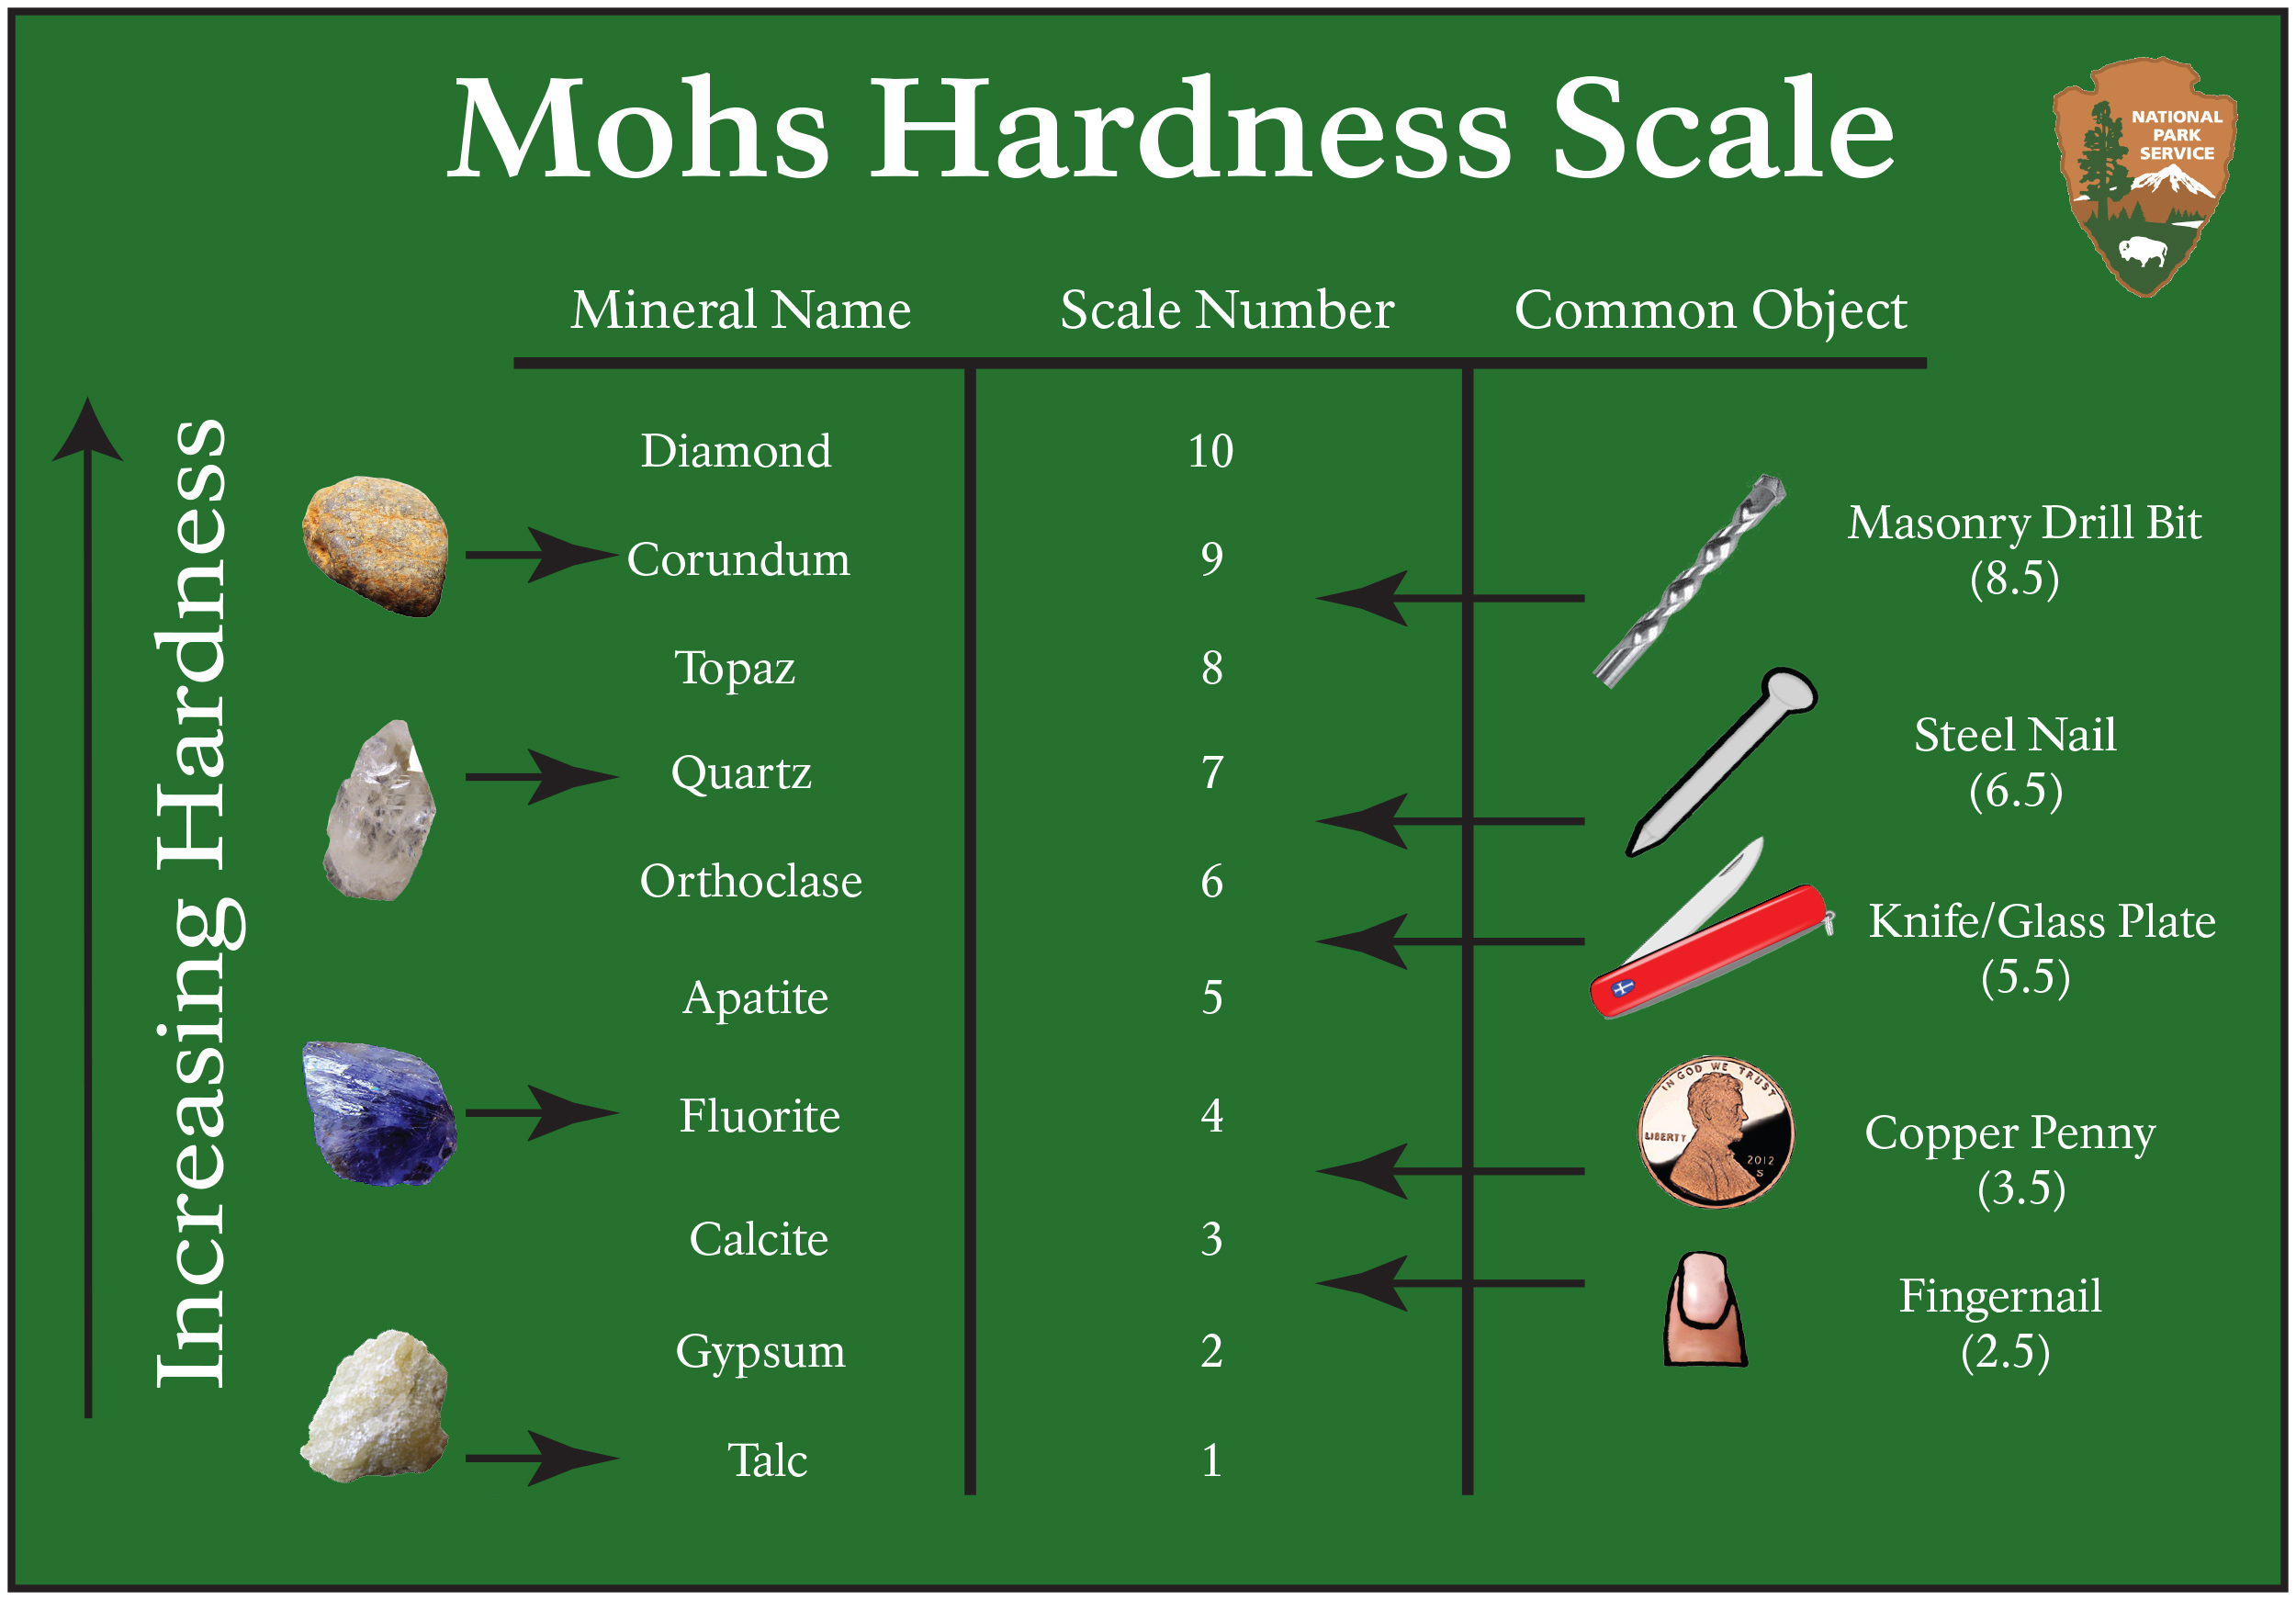 Moh's Hardness Scale